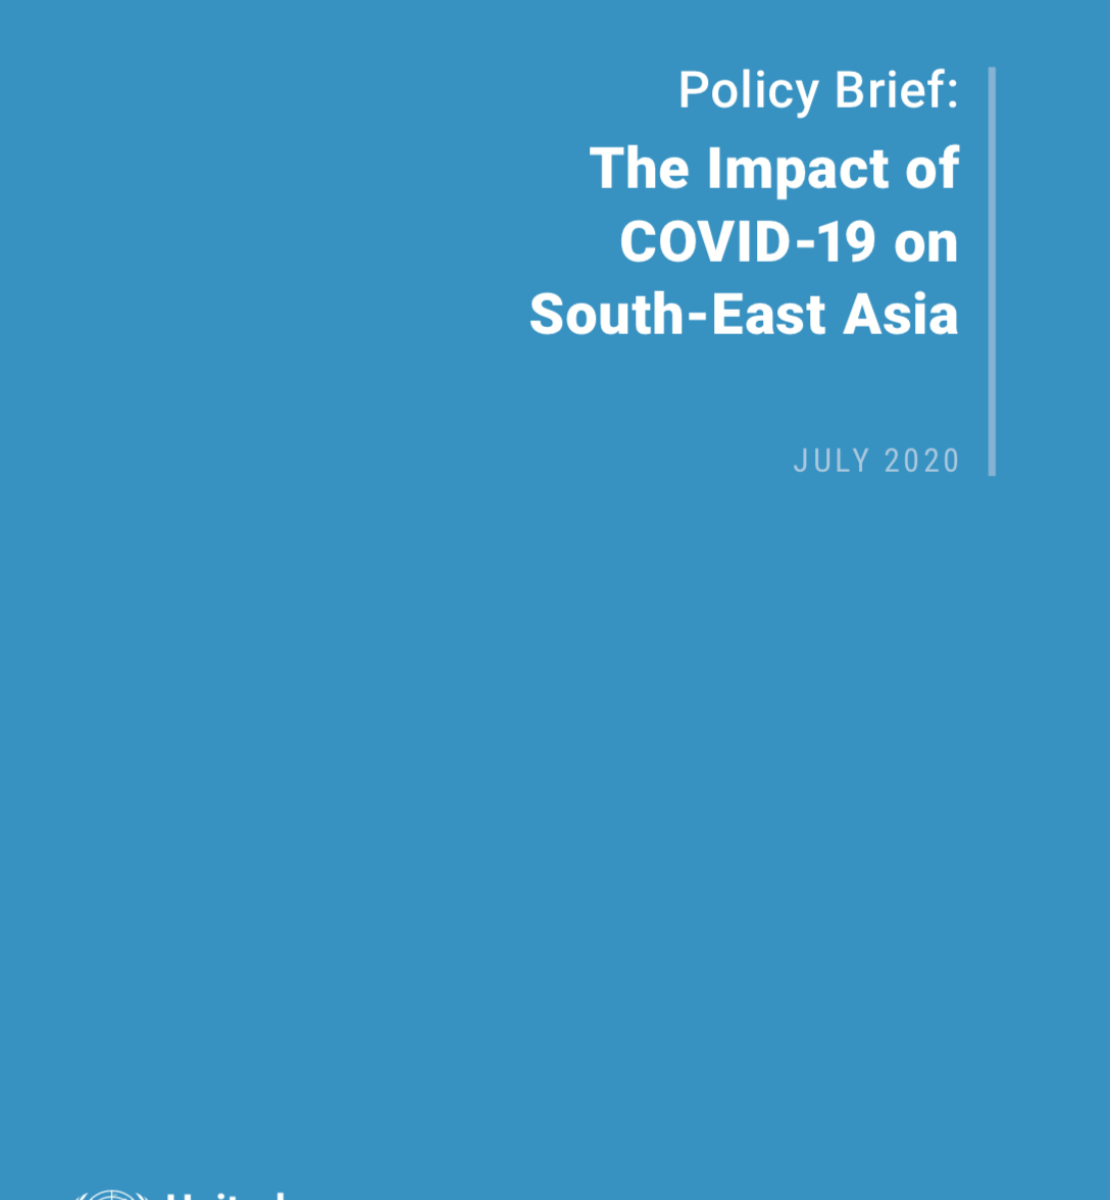 Cover shows the title "Policy Brief: The Impact of COVID-19 on South-East Asia" against a solid blue background with the UN emblem on the lower left side.